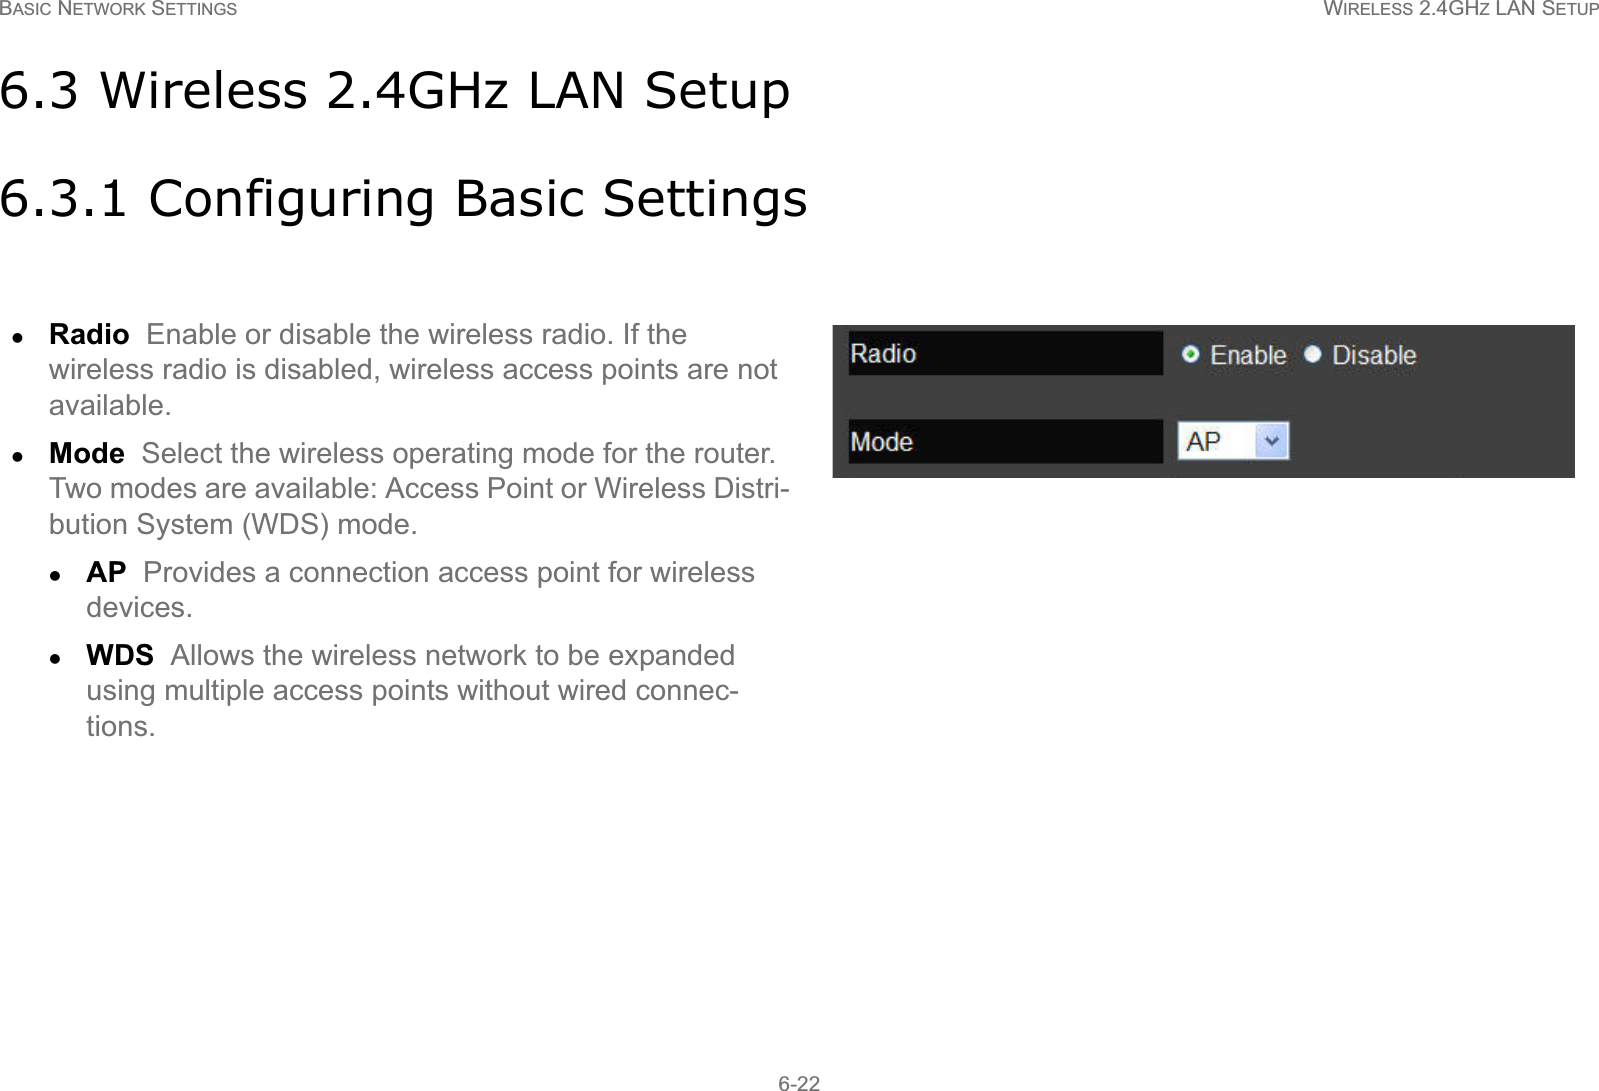 BASIC NETWORK SETTINGS WIRELESS 2.4GHZ LAN SETUP6-226.3 Wireless 2.4GHz LAN Setup6.3.1 Configuring Basic SettingszRadio  Enable or disable the wireless radio. If the wireless radio is disabled, wireless access points are not available.zMode  Select the wireless operating mode for the router. Two modes are available: Access Point or Wireless Distri-bution System (WDS) mode.zAP  Provides a connection access point for wireless devices.zWDS  Allows the wireless network to be expanded using multiple access points without wired connec-tions.